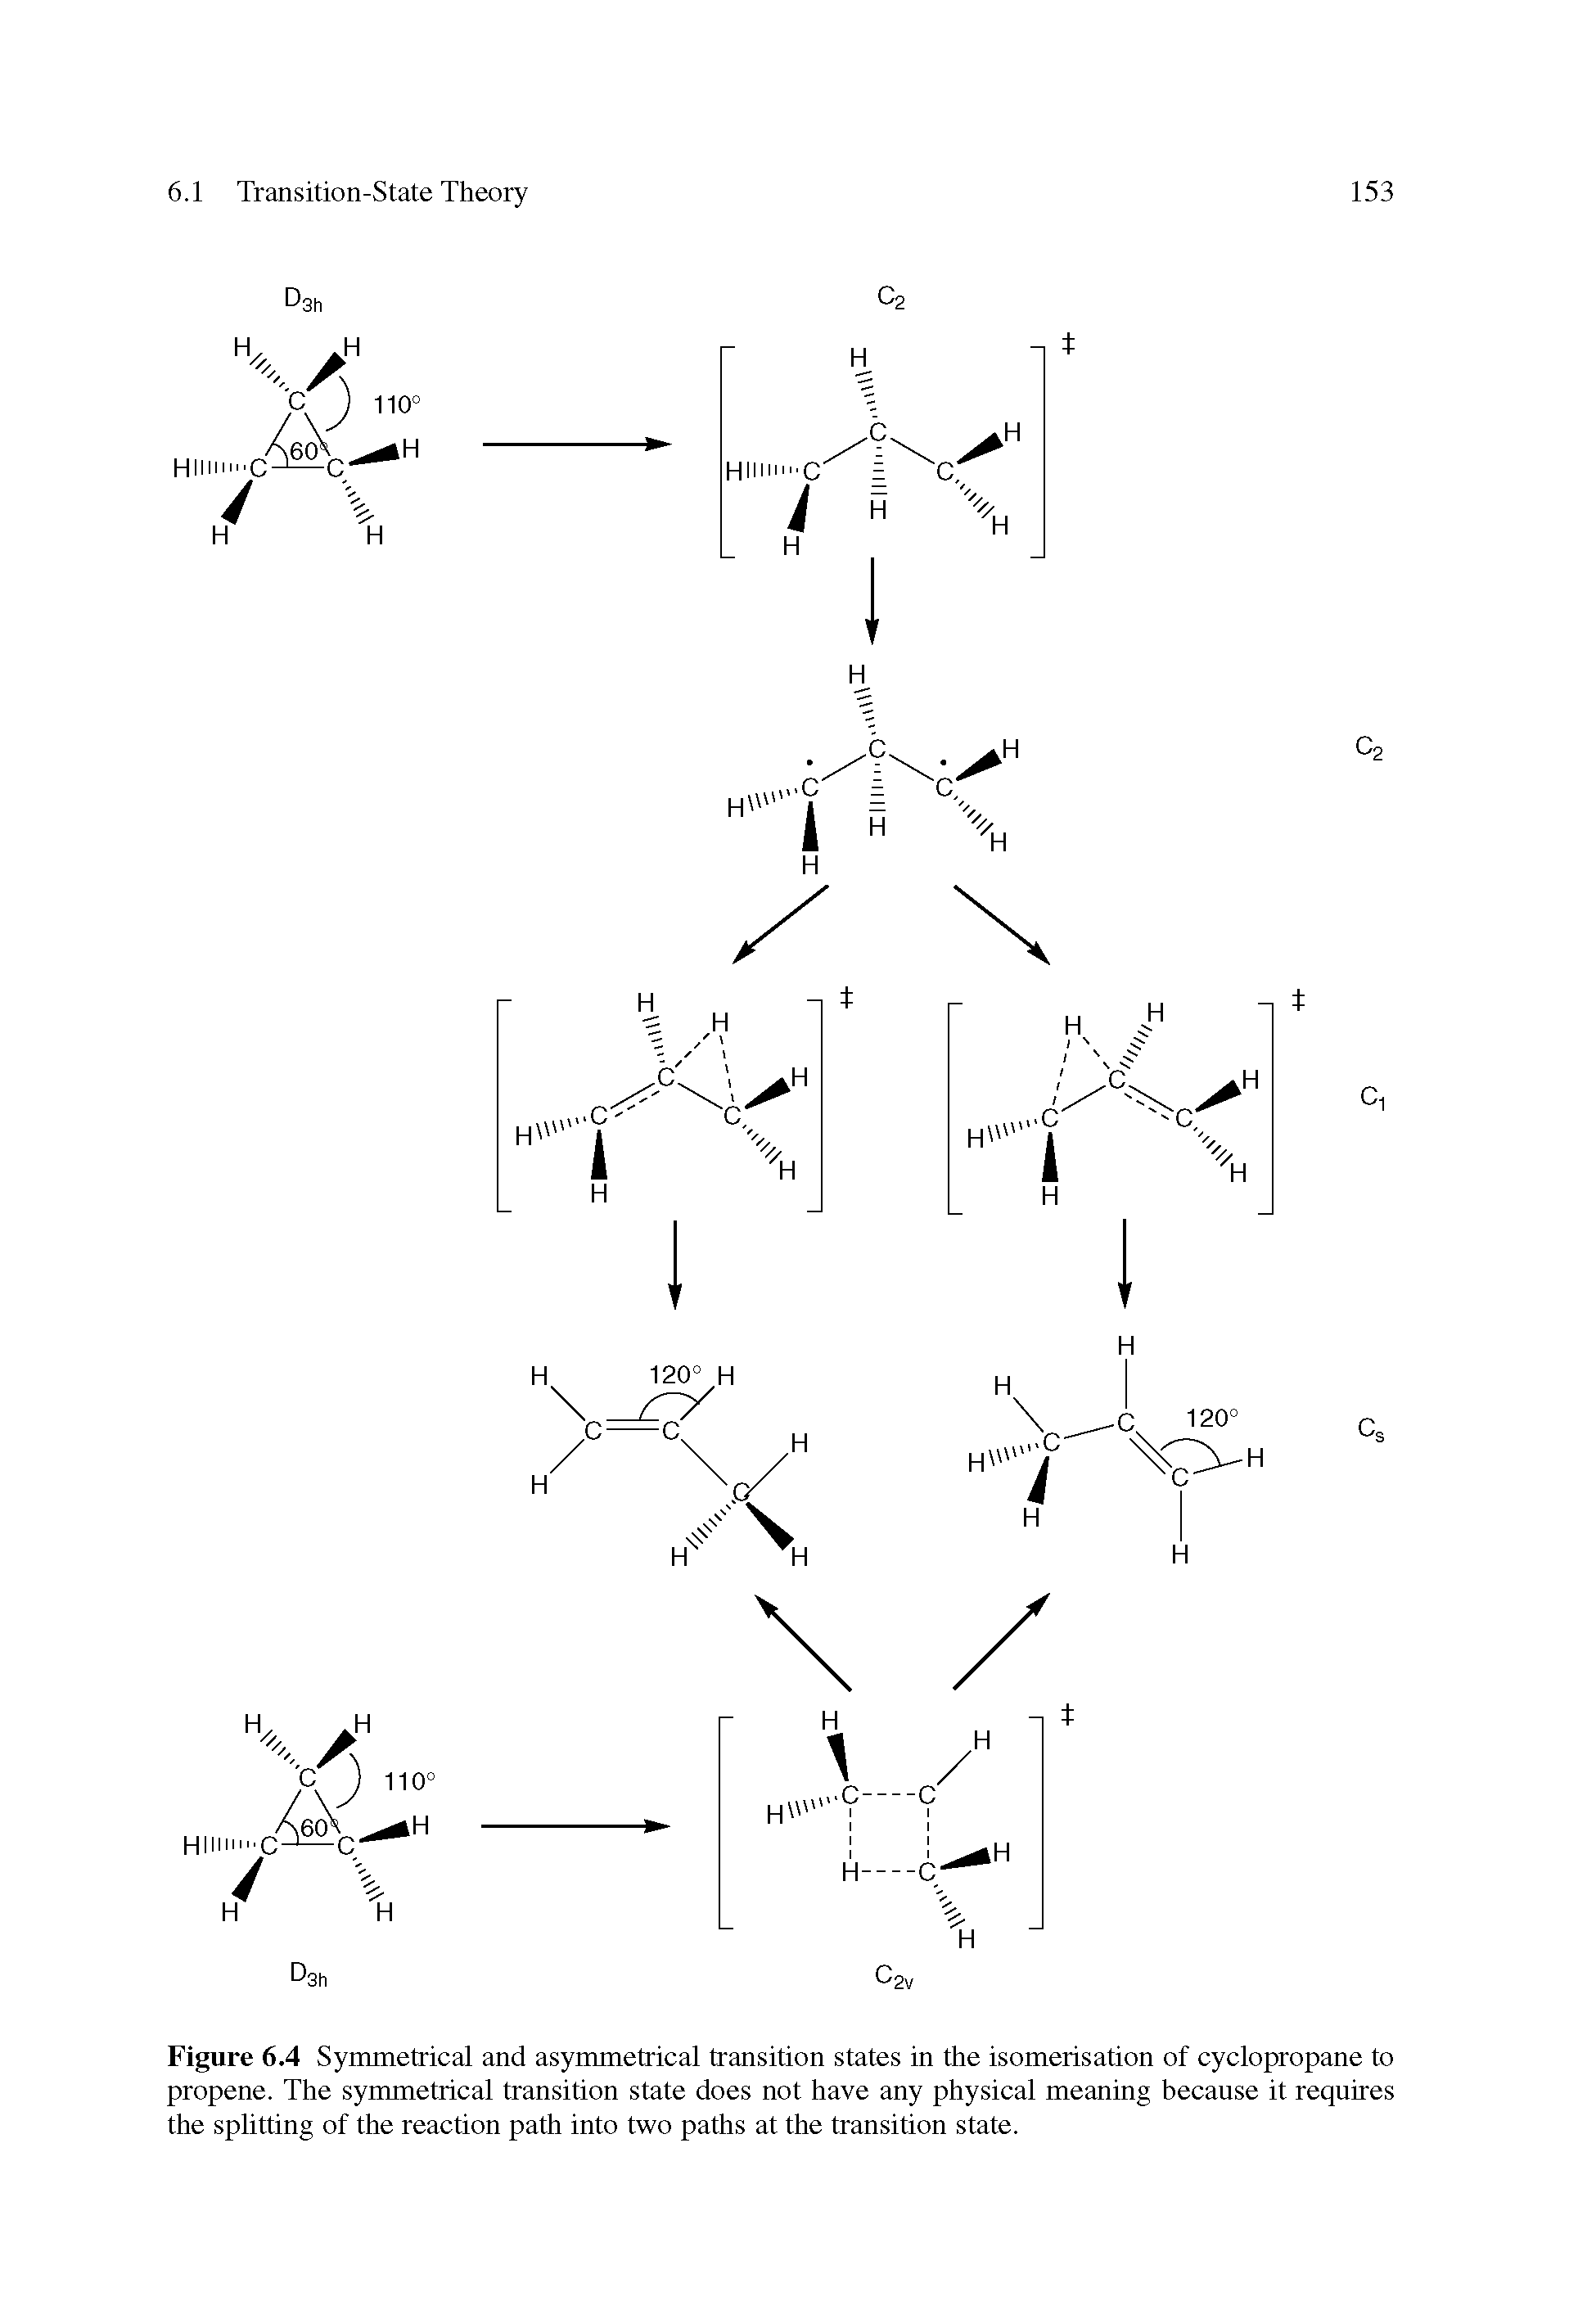 Figure 6.4 Symmetrical and asymmetrical transition states in the isomerisation of cyclopropane to propene. The symmetrical transition state does not have any physical meaning because it requires the splitting of the reaction path into two paths at the transition state.